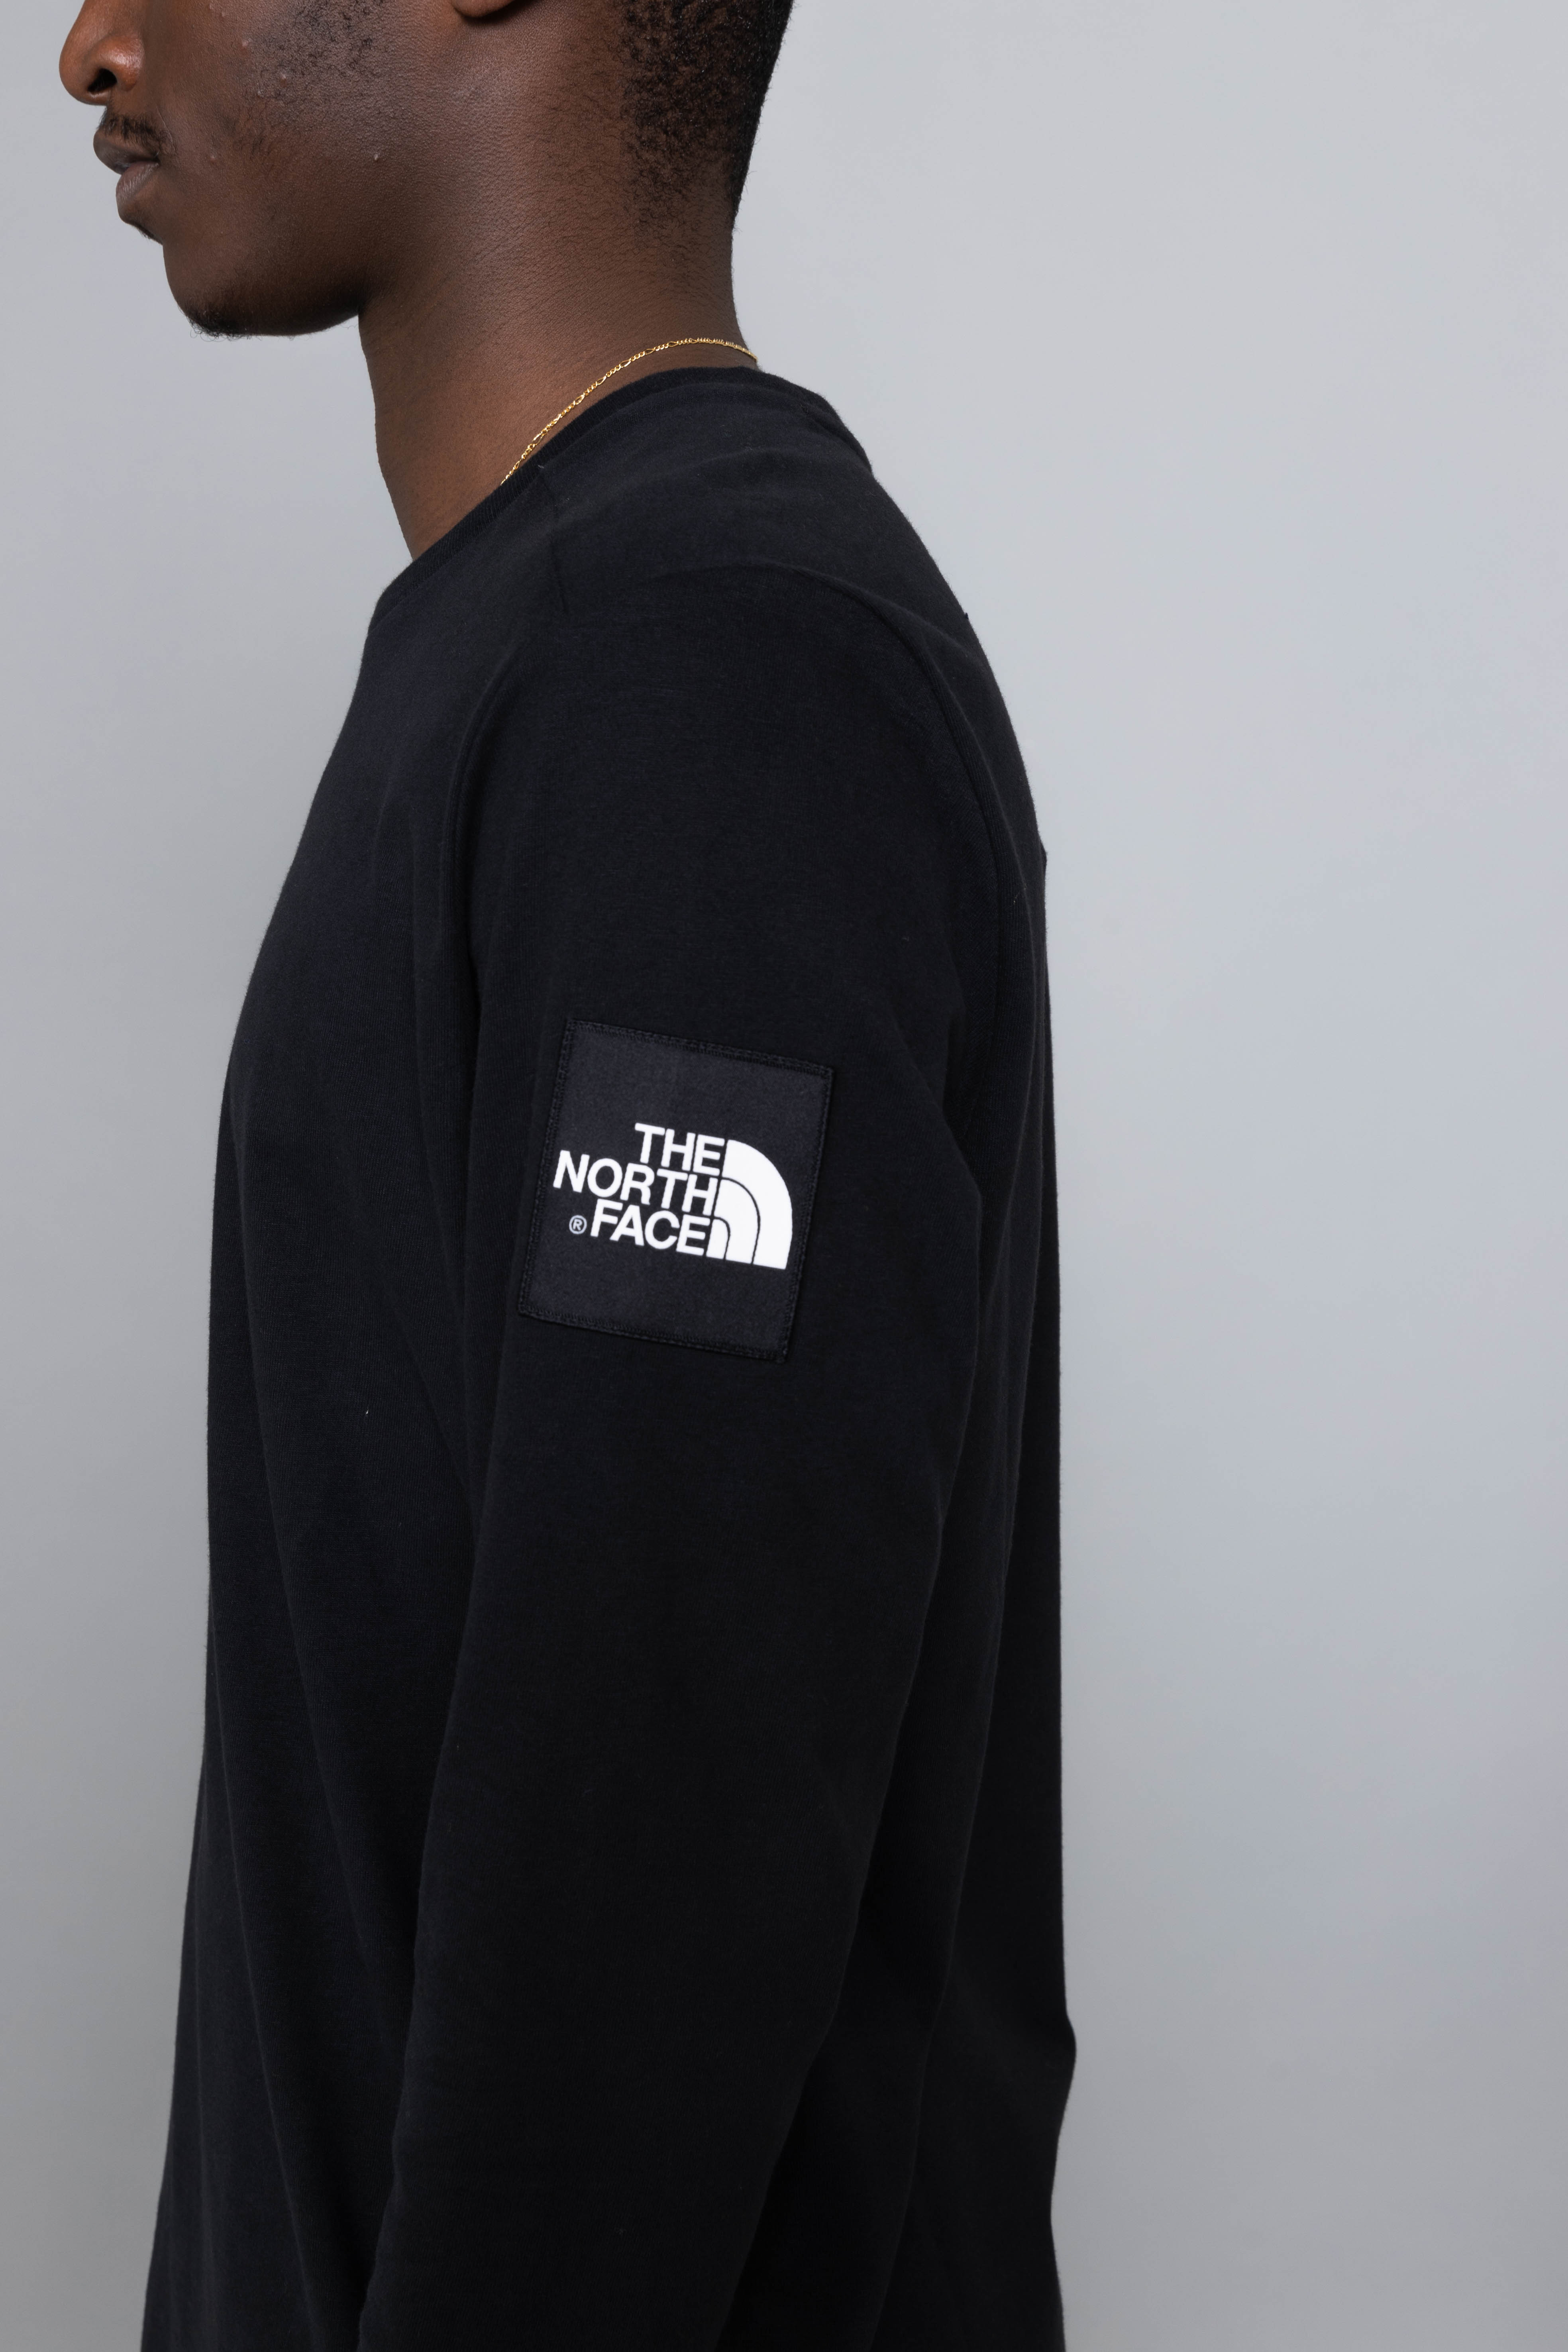 the north face fine 2 long sleeve